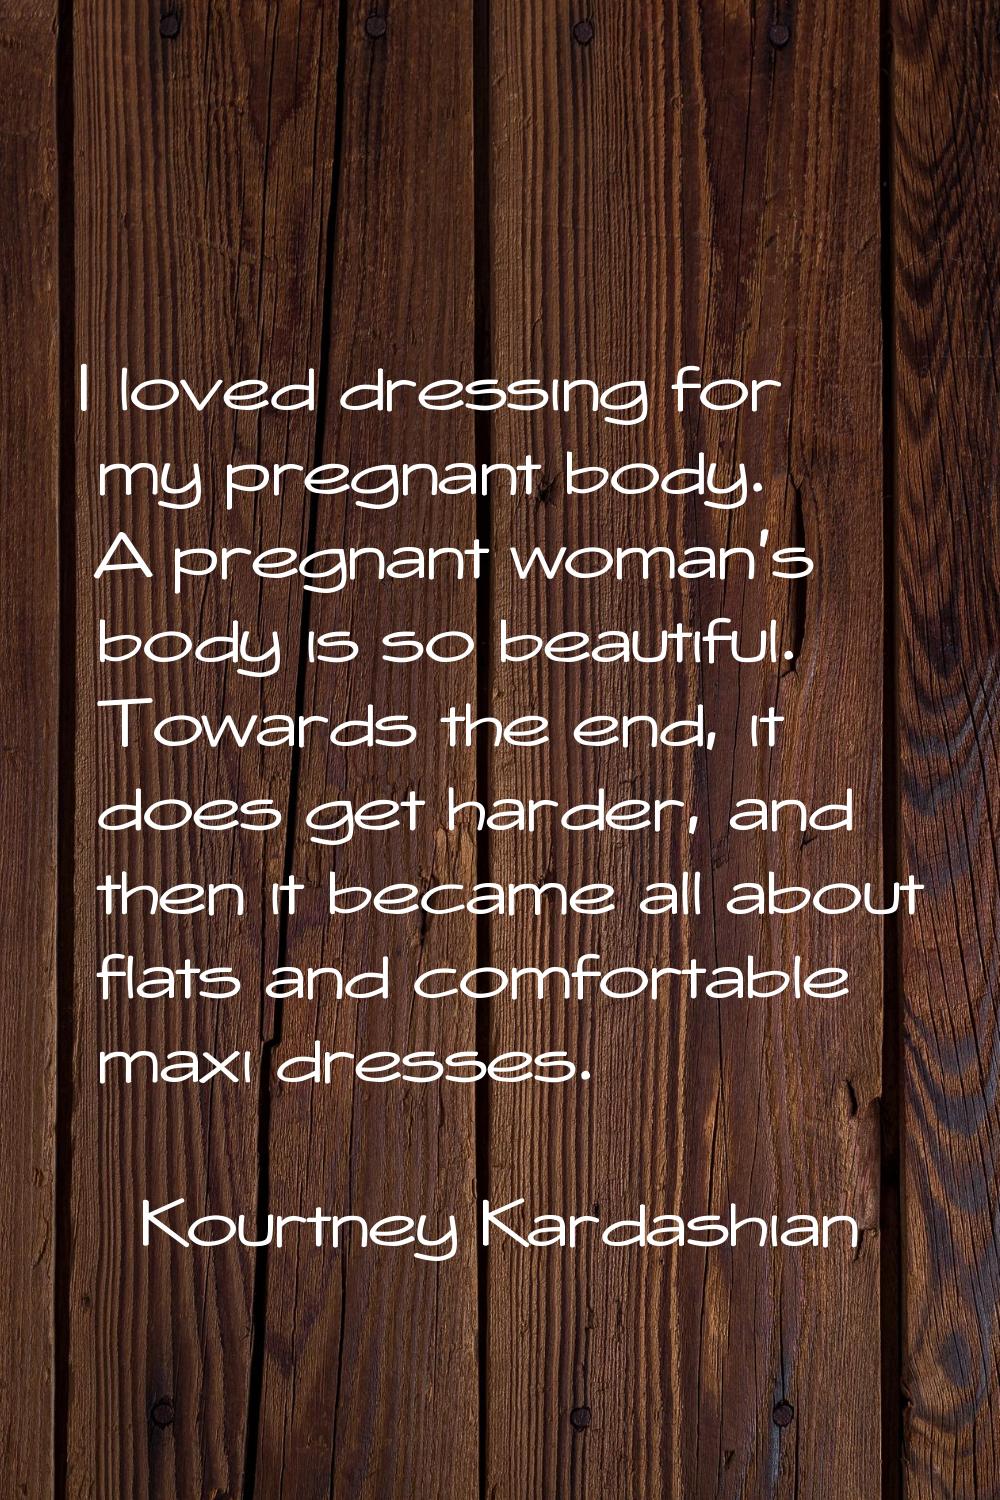 I loved dressing for my pregnant body. A pregnant woman's body is so beautiful. Towards the end, it